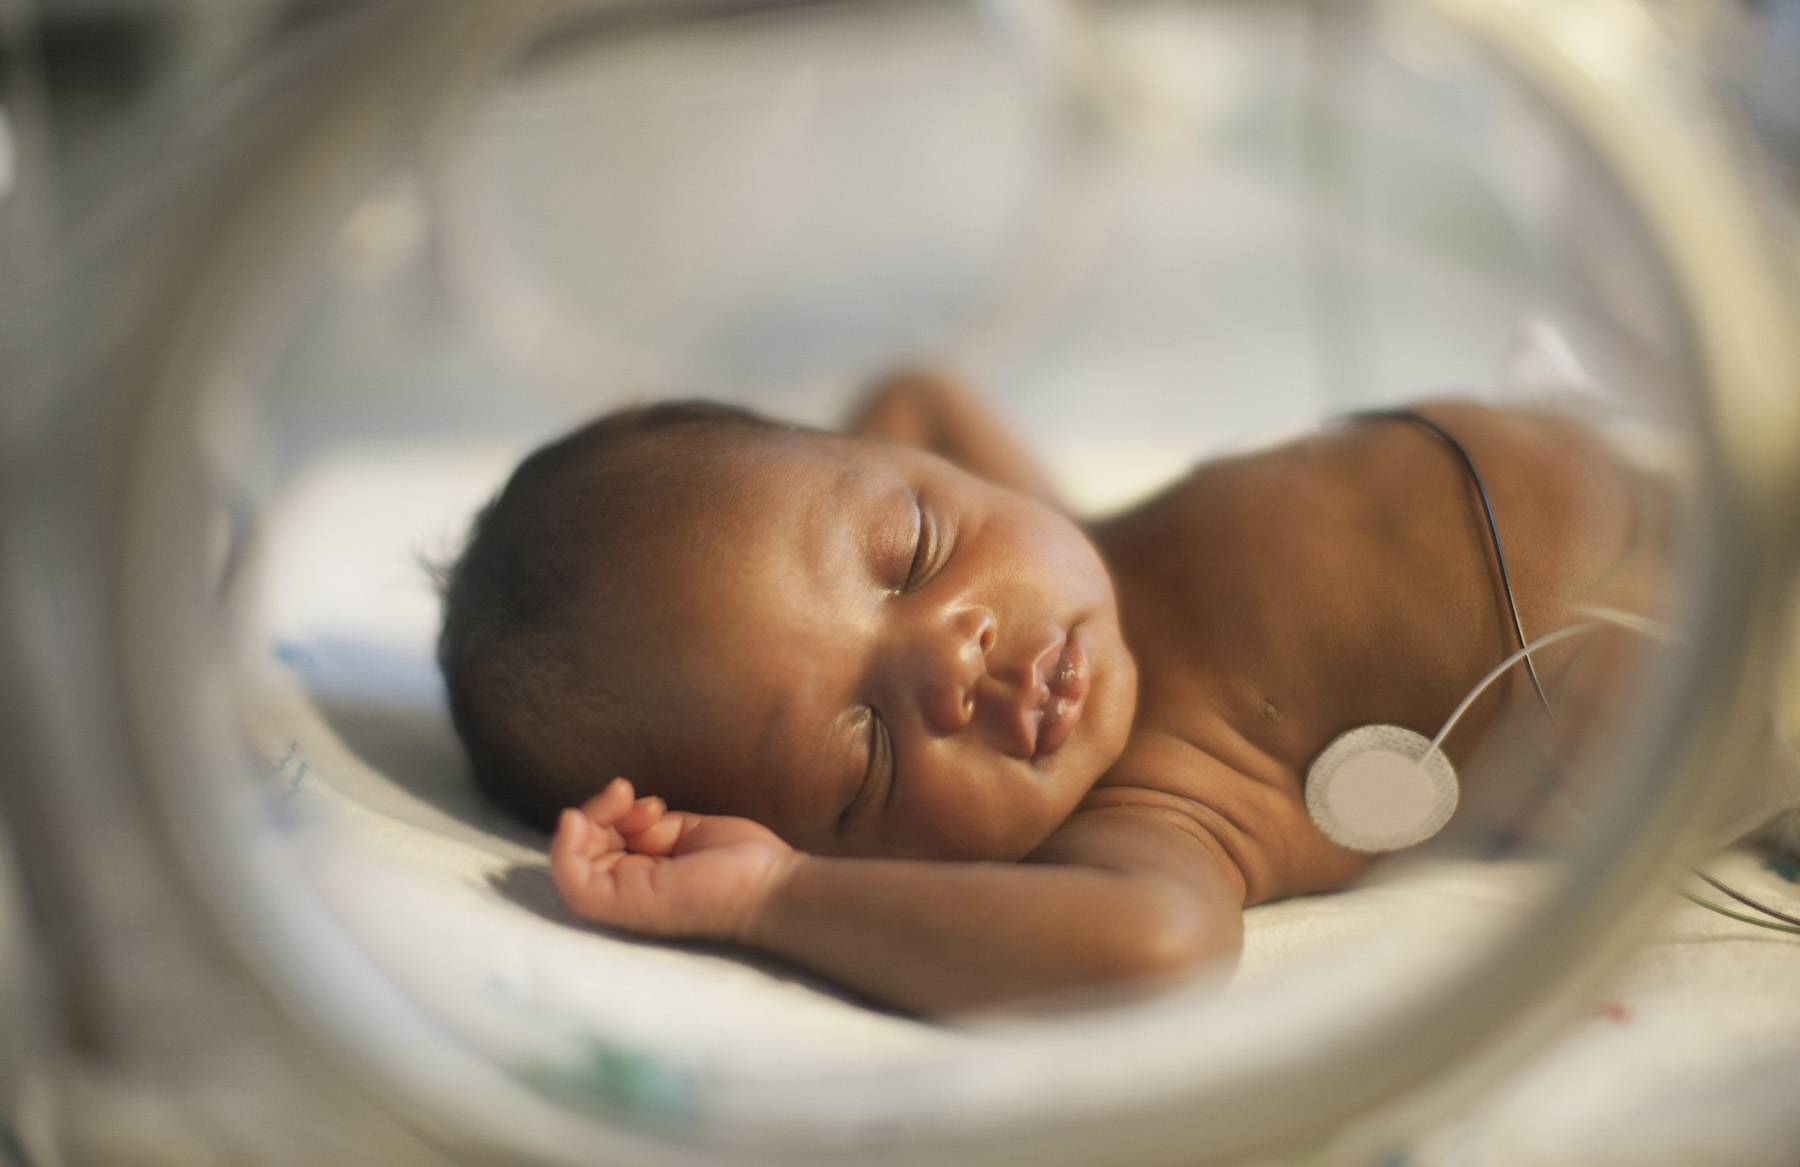 A baby with low birthweight may be at increased risk for complications. Photo/Net